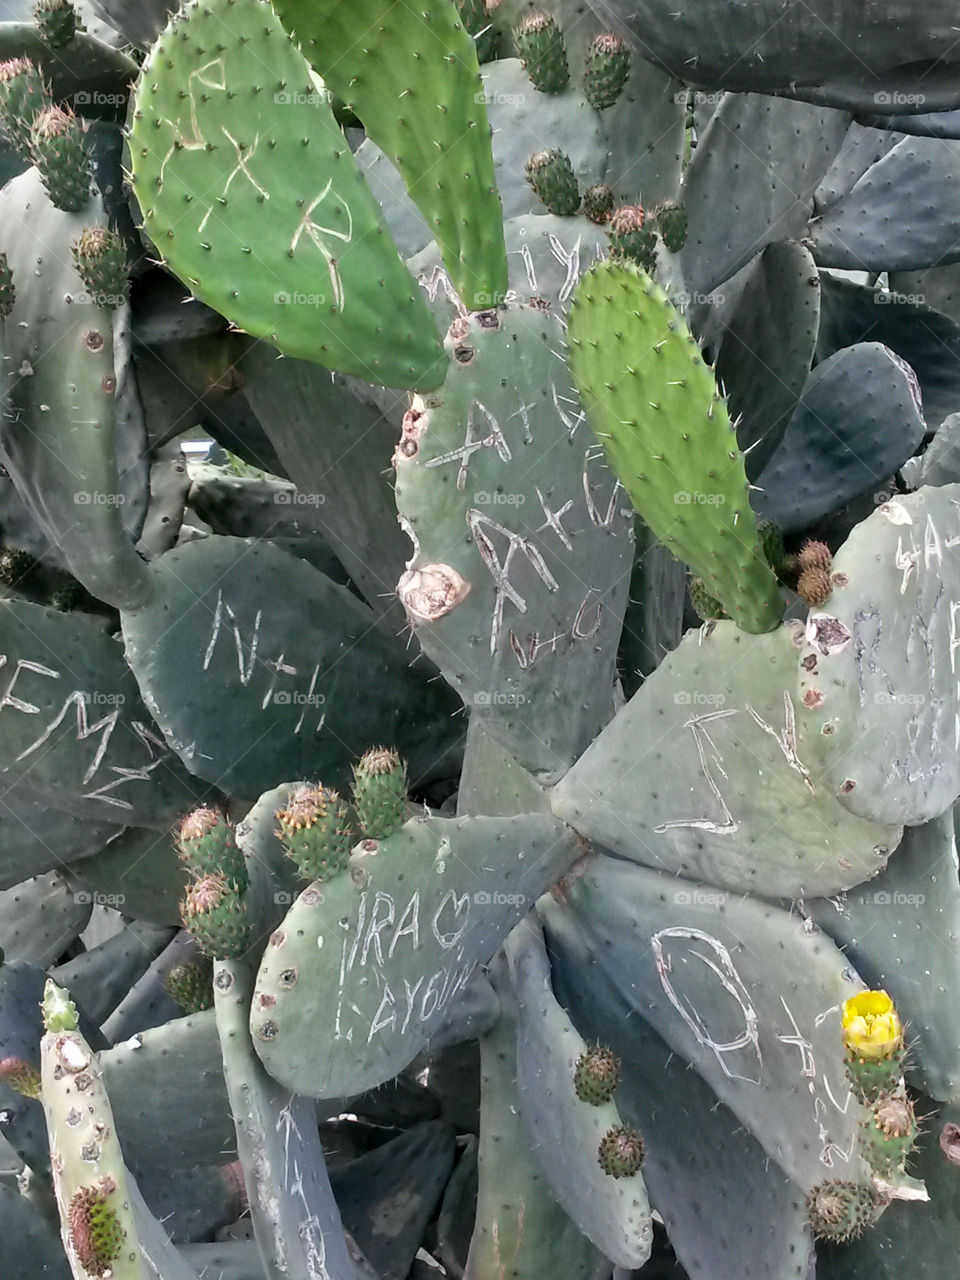 Names on the cactus